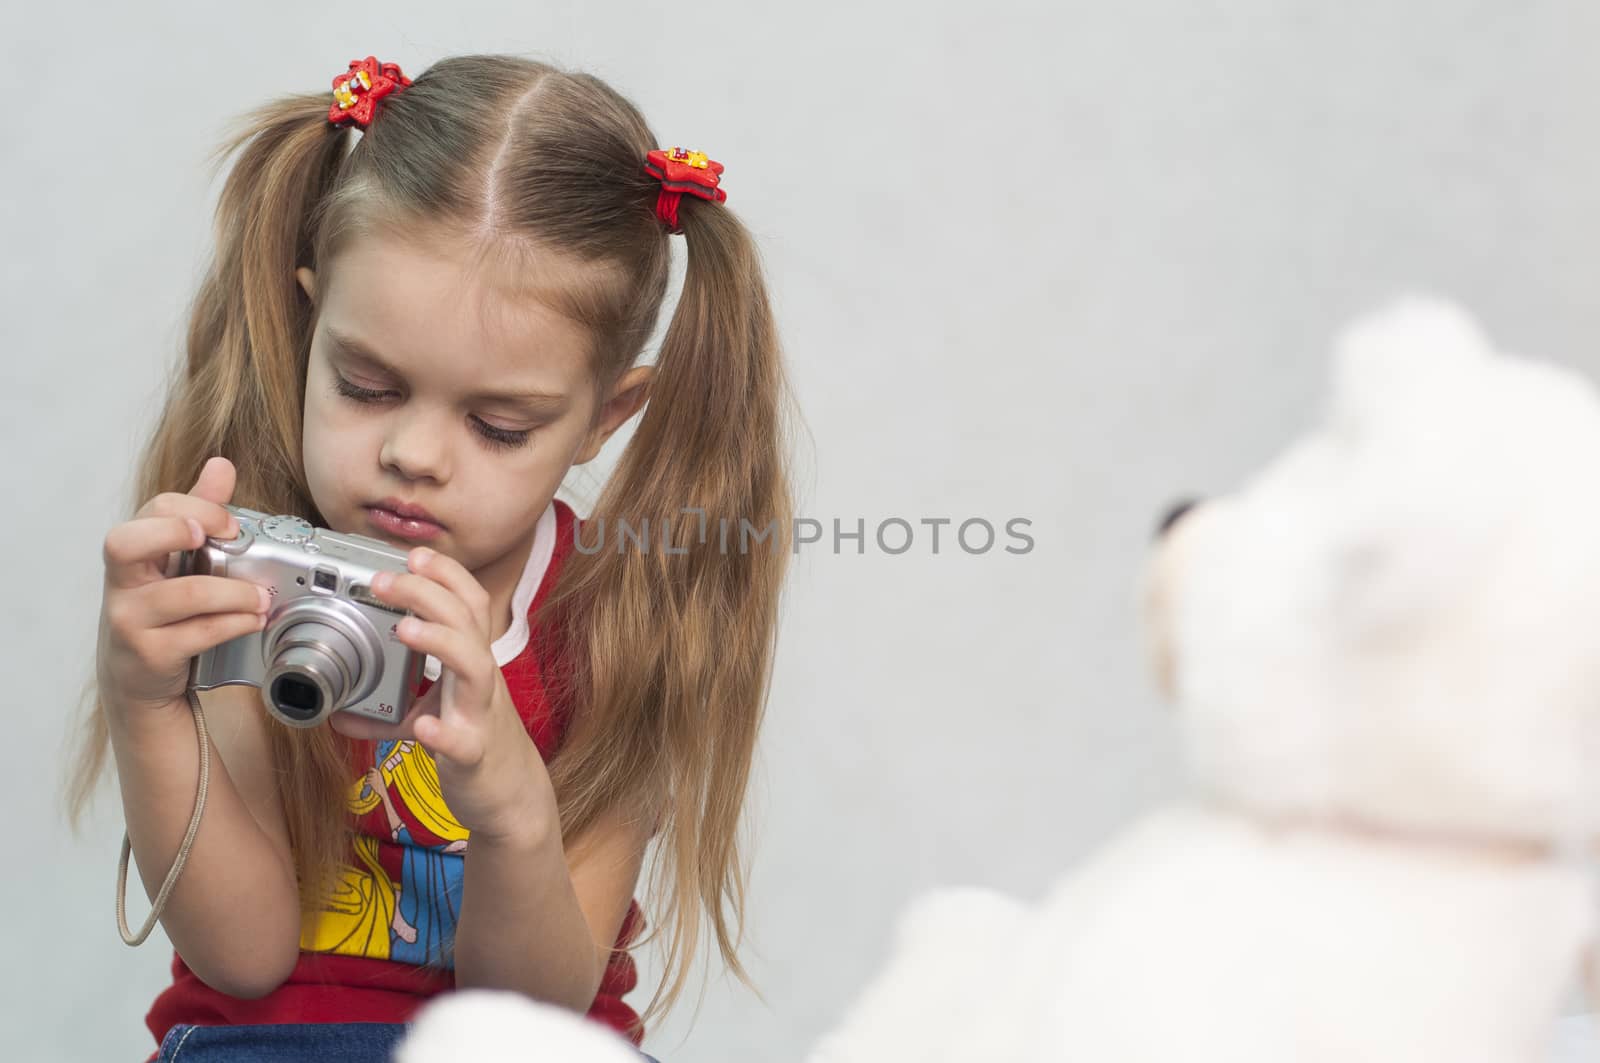 Girl takes photo of Teddy digital camera by Madhourse